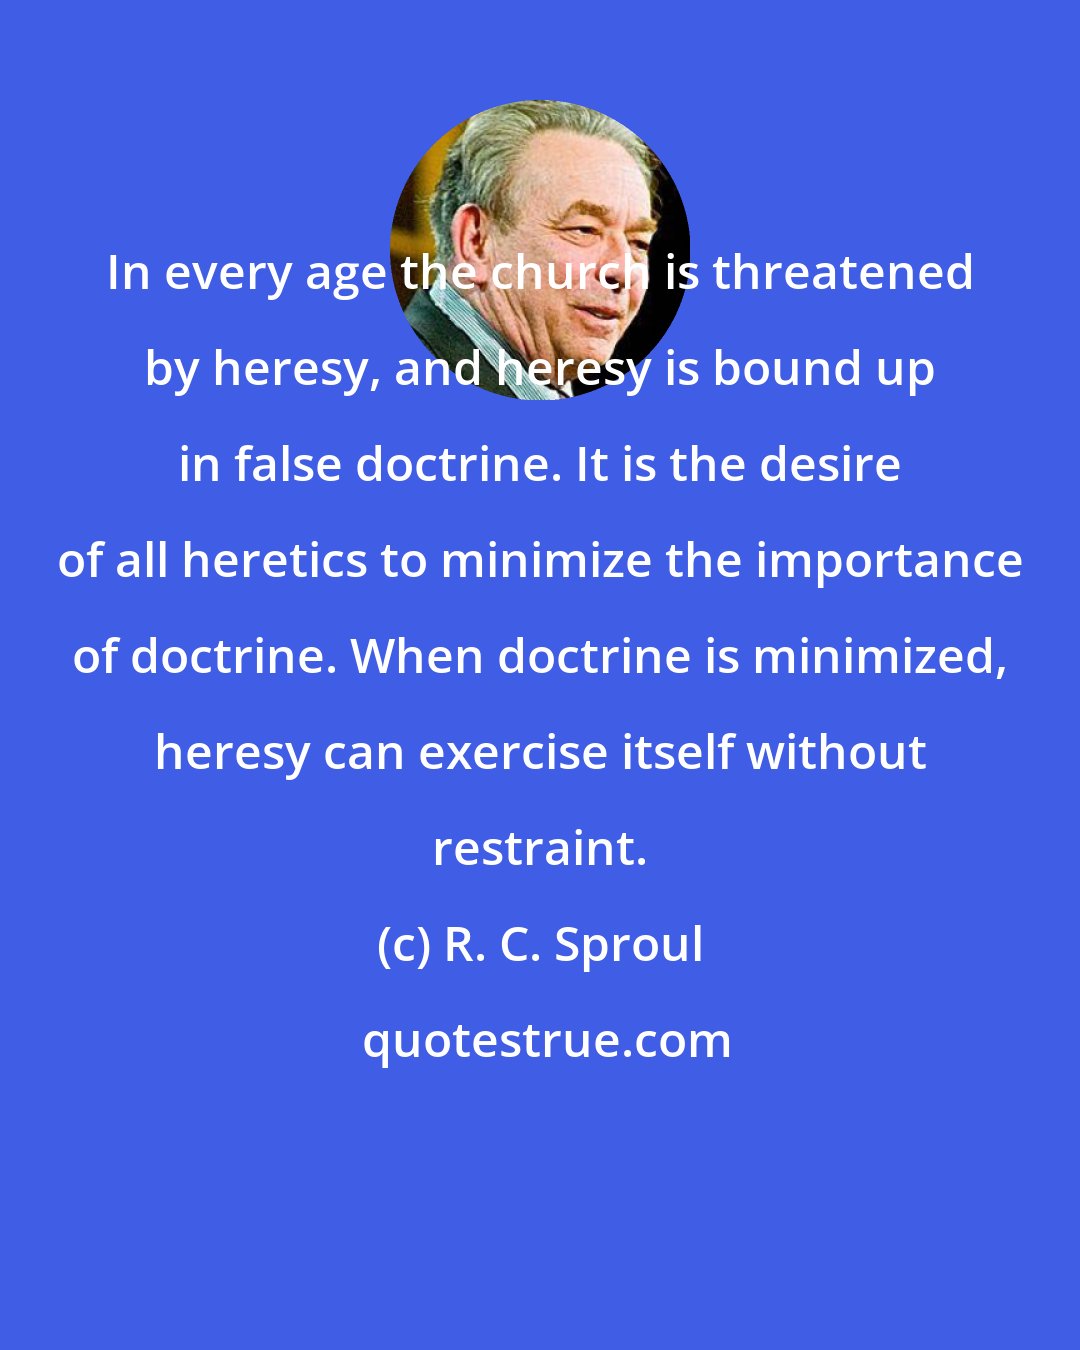 R. C. Sproul: In every age the church is threatened by heresy, and heresy is bound up in false doctrine. It is the desire of all heretics to minimize the importance of doctrine. When doctrine is minimized, heresy can exercise itself without restraint.